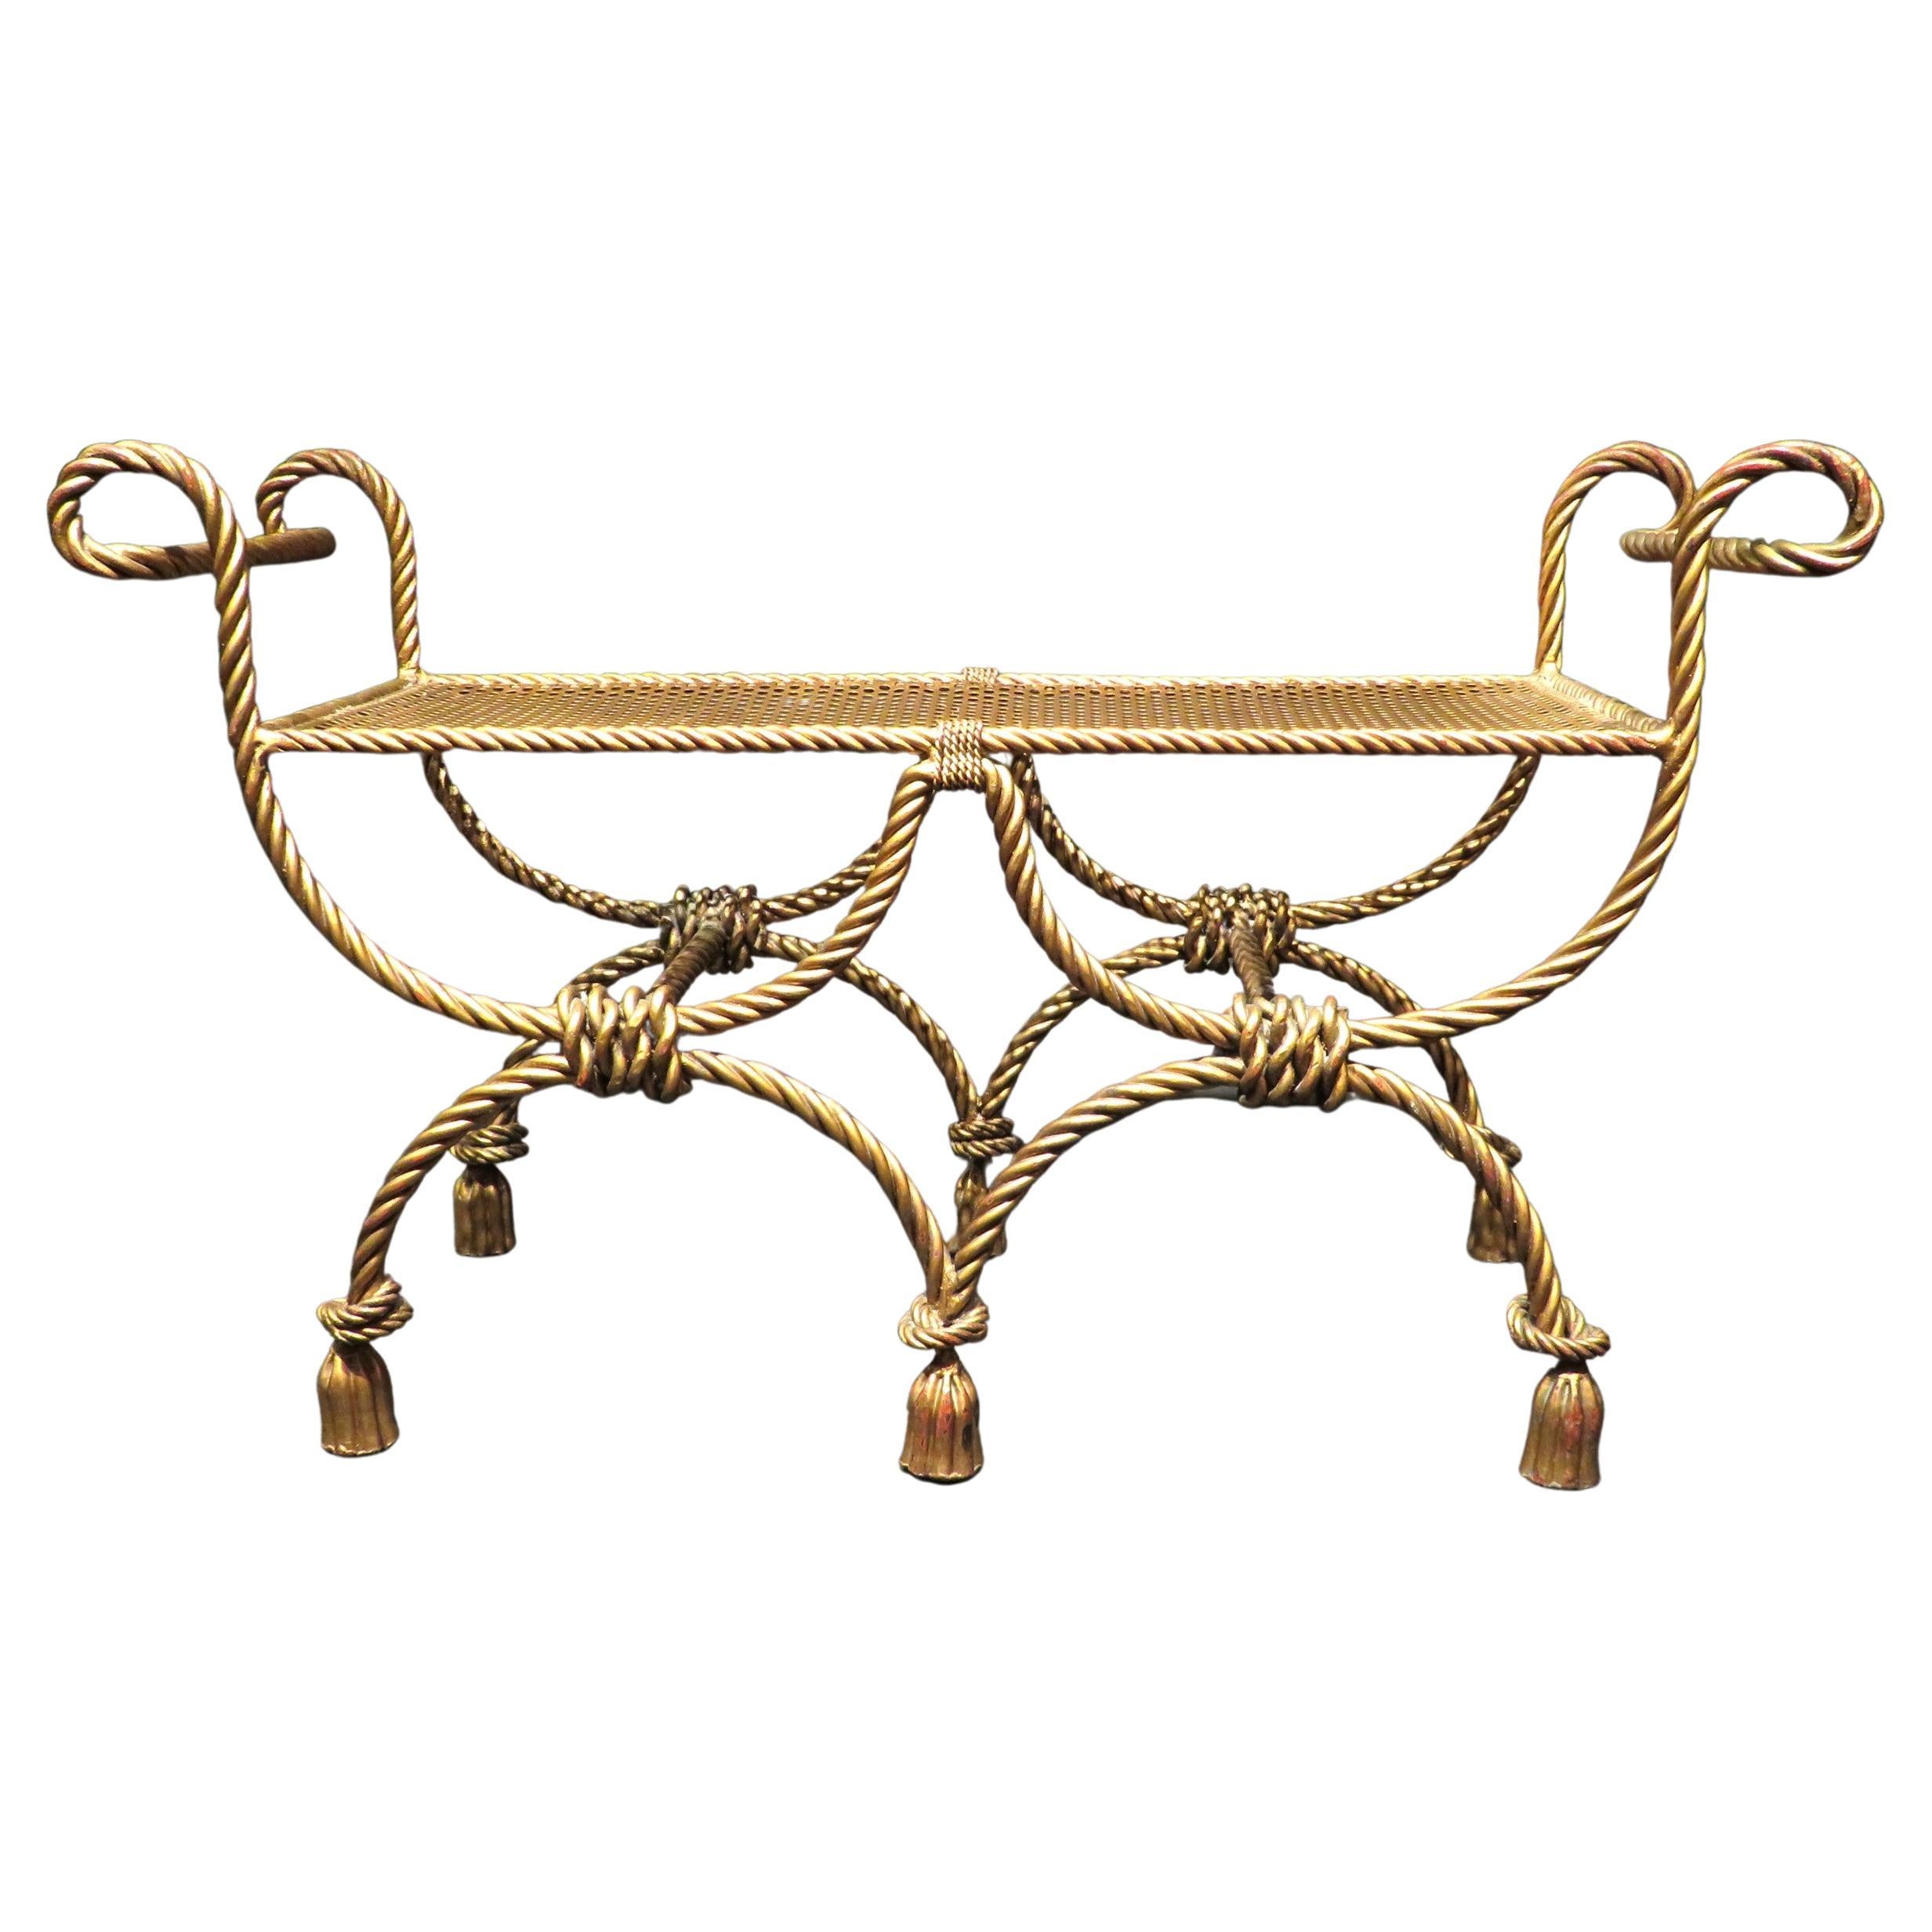 Highly Decorative Hollywood Regency Gilded Rope & Tassel Bench, Italy circa 1950